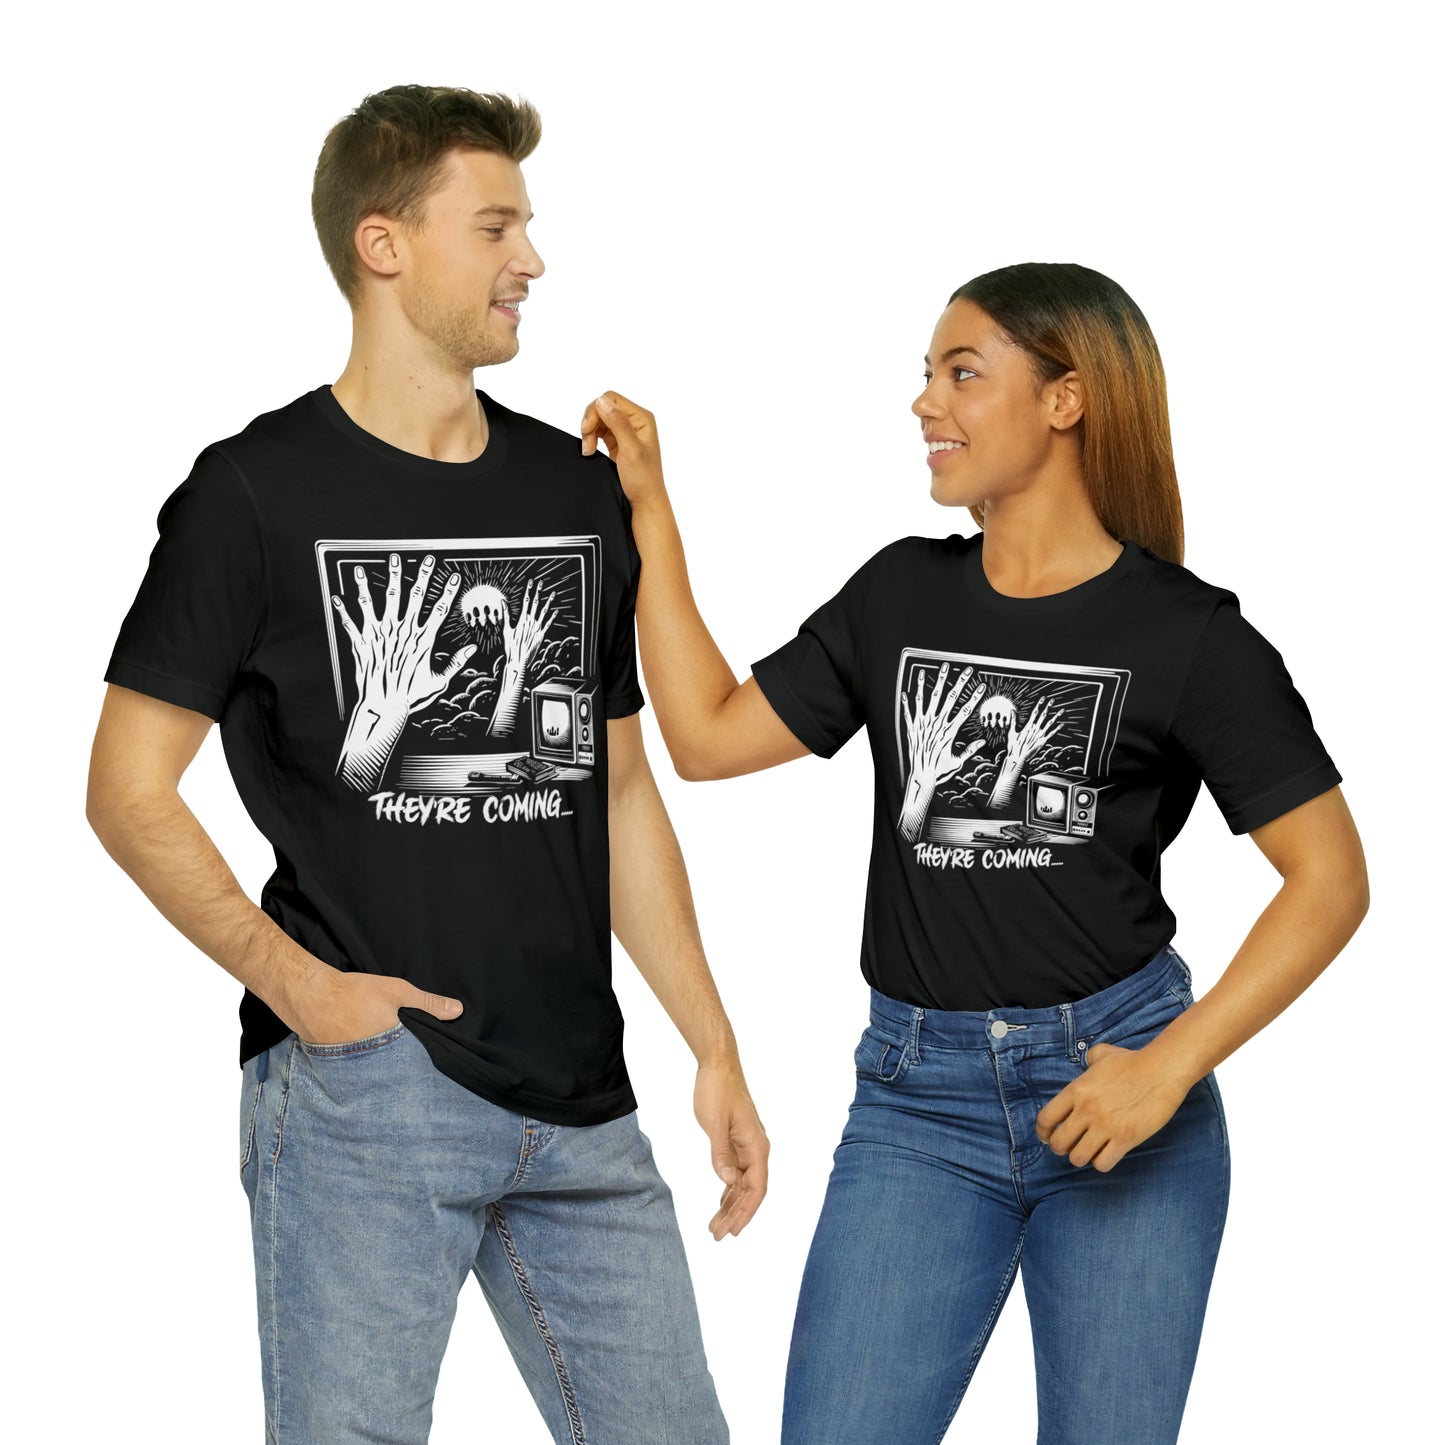 They're Coming Haunted Halloween Retro Eerie Anticipation T-Shirt